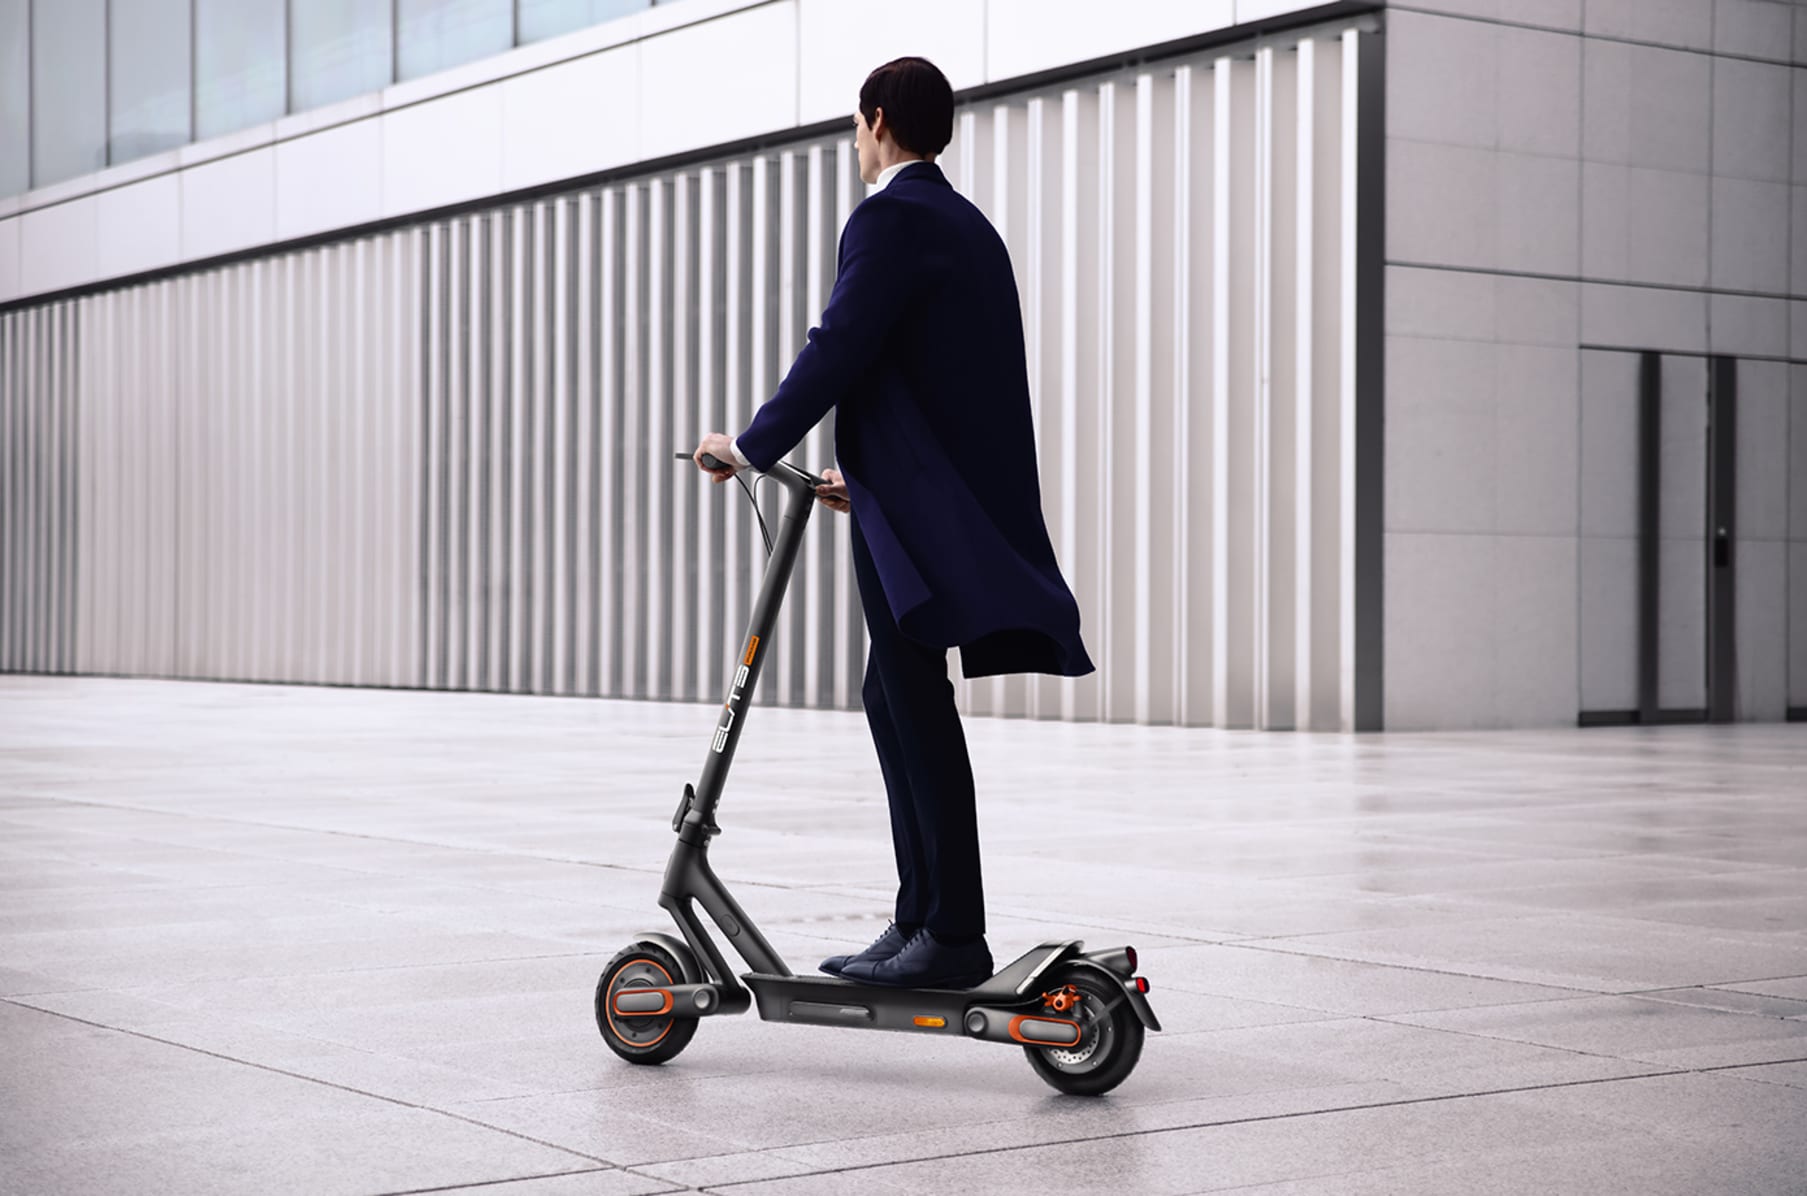 Head-to-head: Pure Air vs. Xiaomi M365 / 1S electric scooters